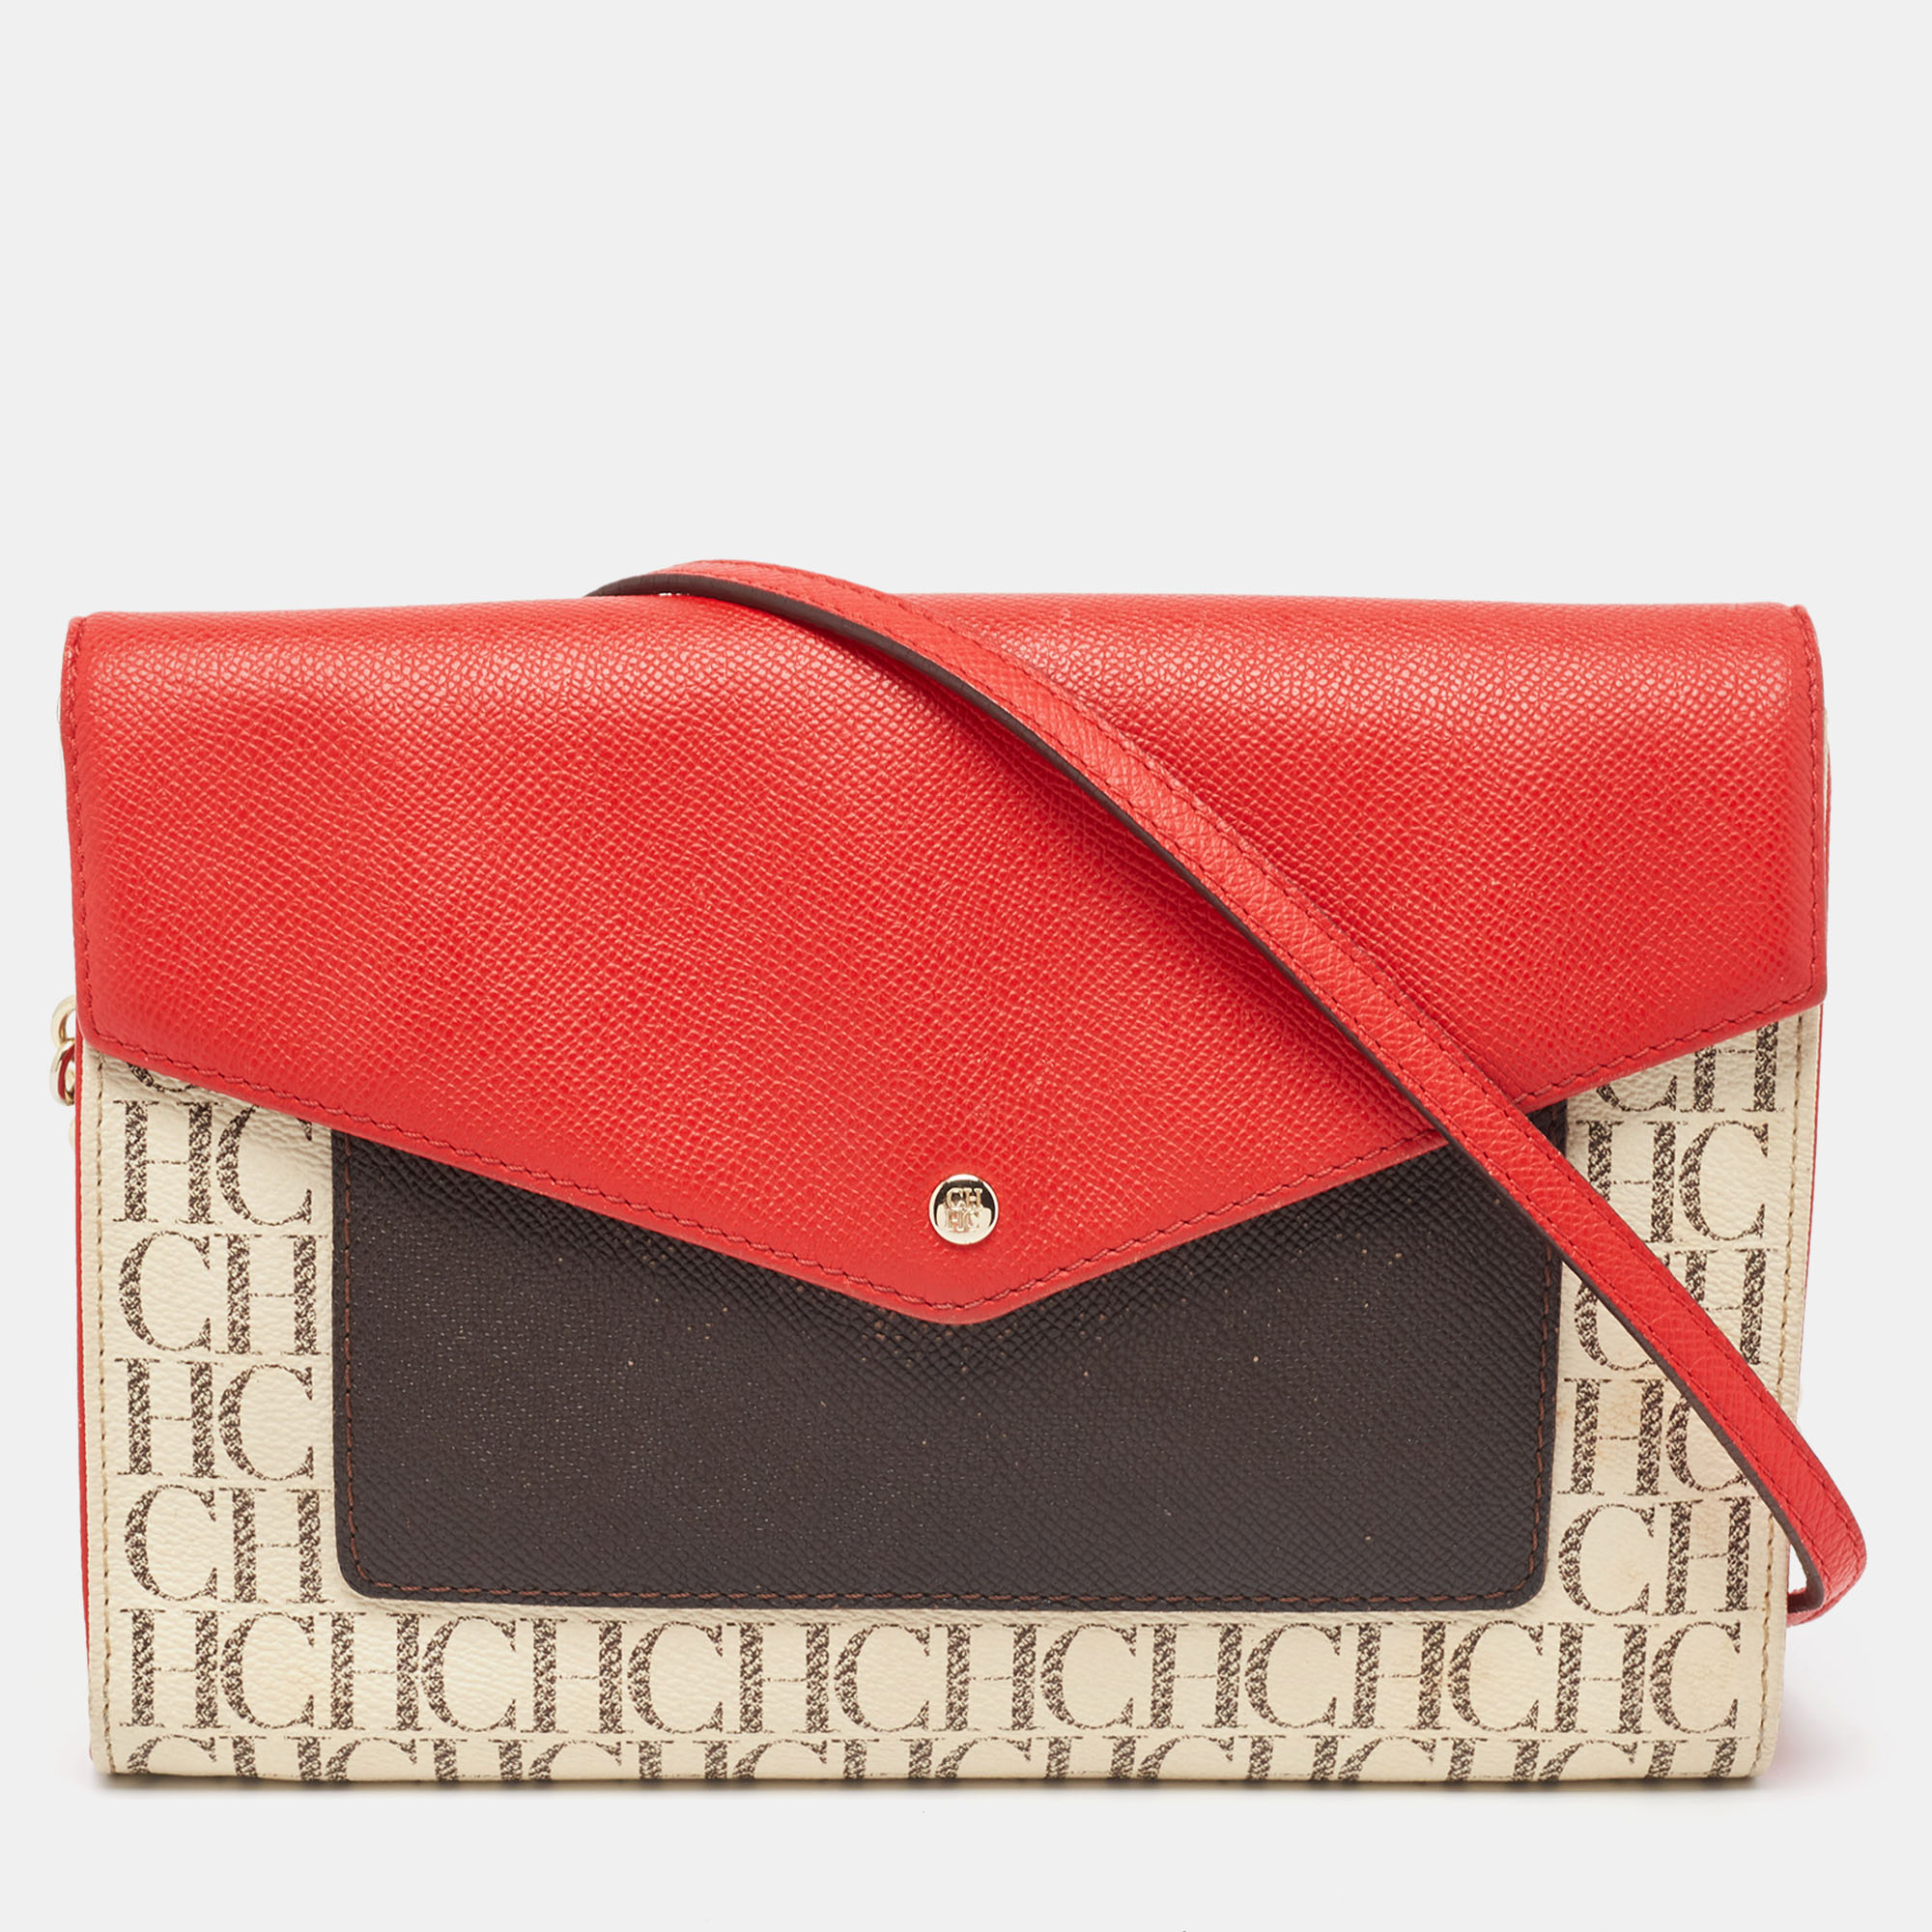 

Carolina Herrera Red/Brown Signature Coated Canvas and Leather Envelope Flap Bag